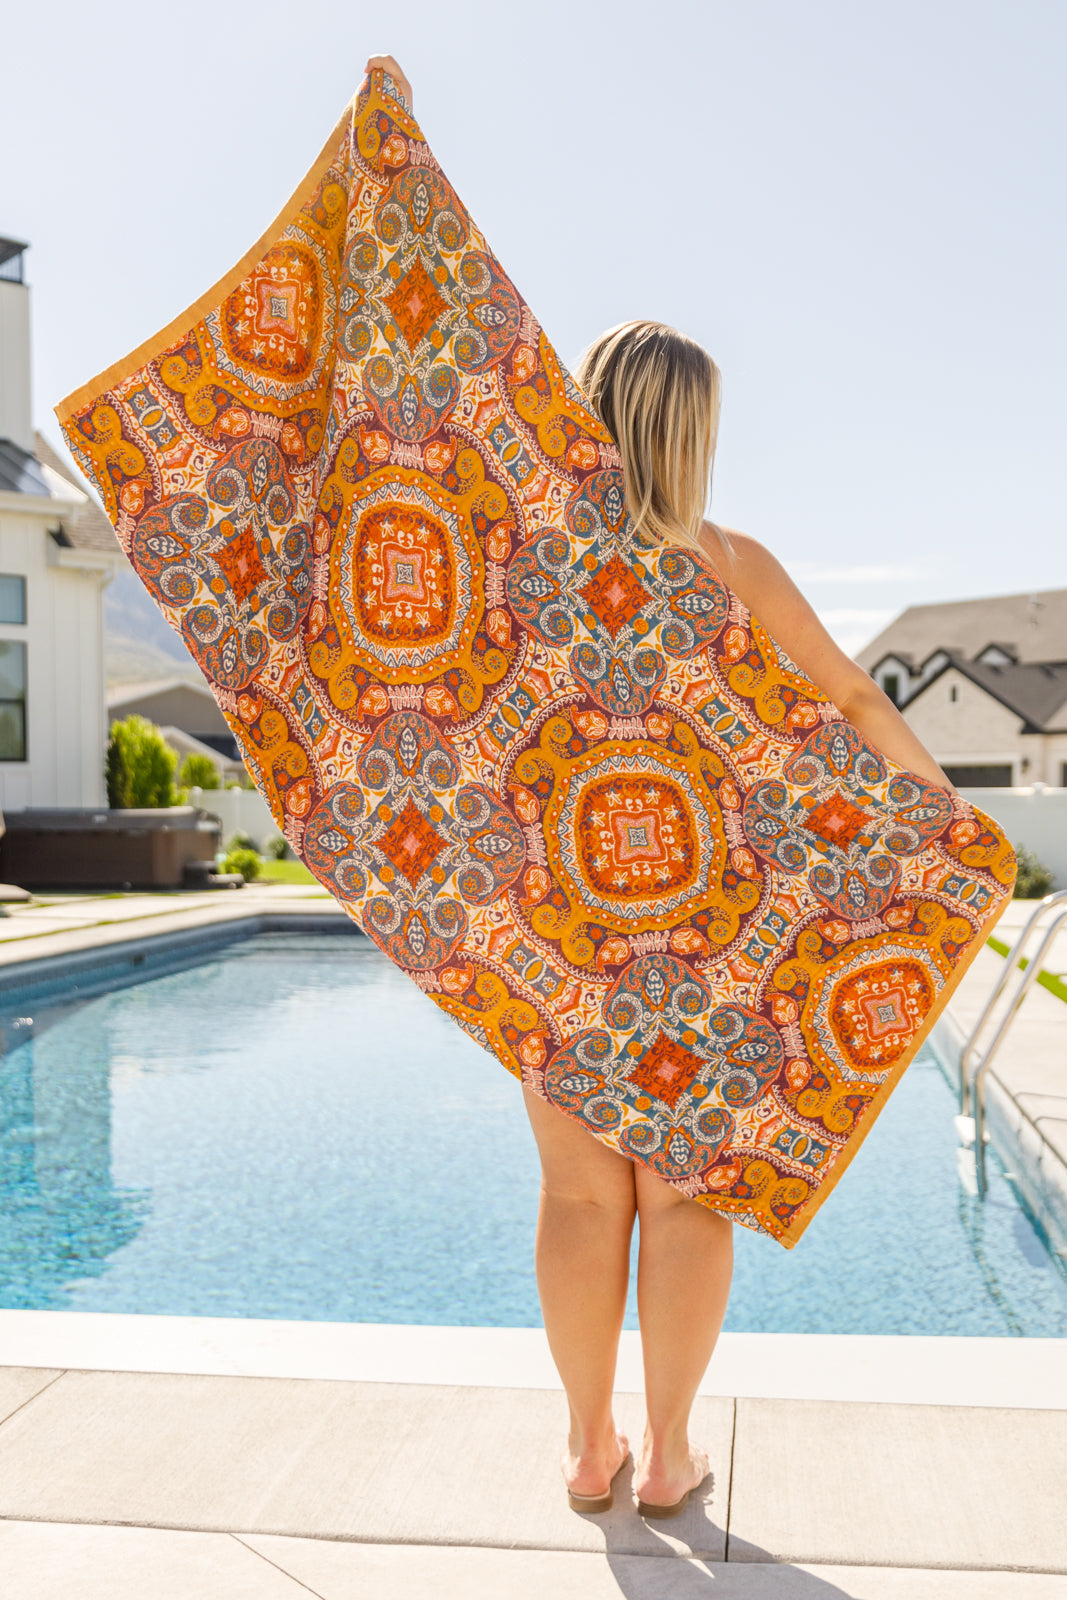 Luxury Beach Towel in Boho Medallions-Home & Decor-Ave Shops-Market Street Nest, Fashionable Clothing, Shoes and Home Décor Located in Mabank, TX